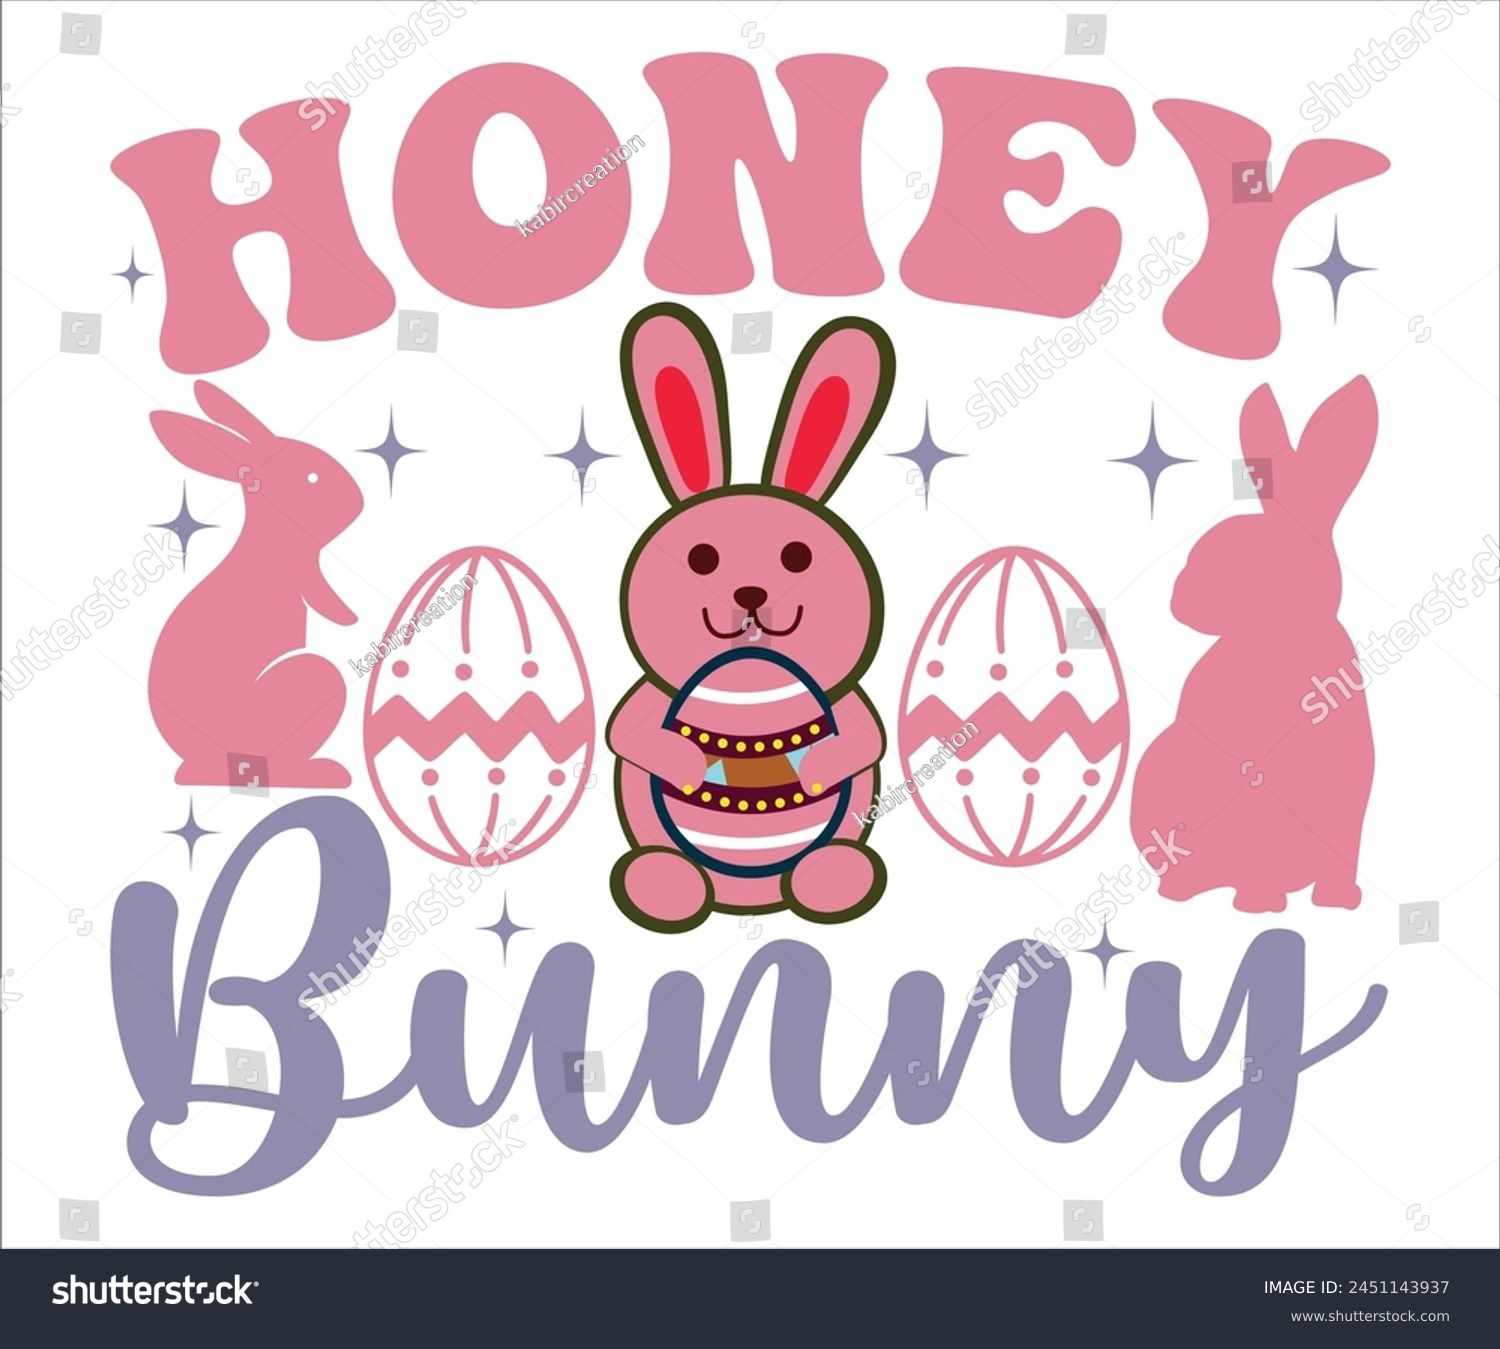 SVG of Honey Bunny T-shirt, Happy easter T-shirt, Easter shirt, spring holiday, Easter Cut File,  Bunny and spring T-shirt, Egg for Kids, Egg for Kids, Easter Funny Quotes, Cut File Cricut svg